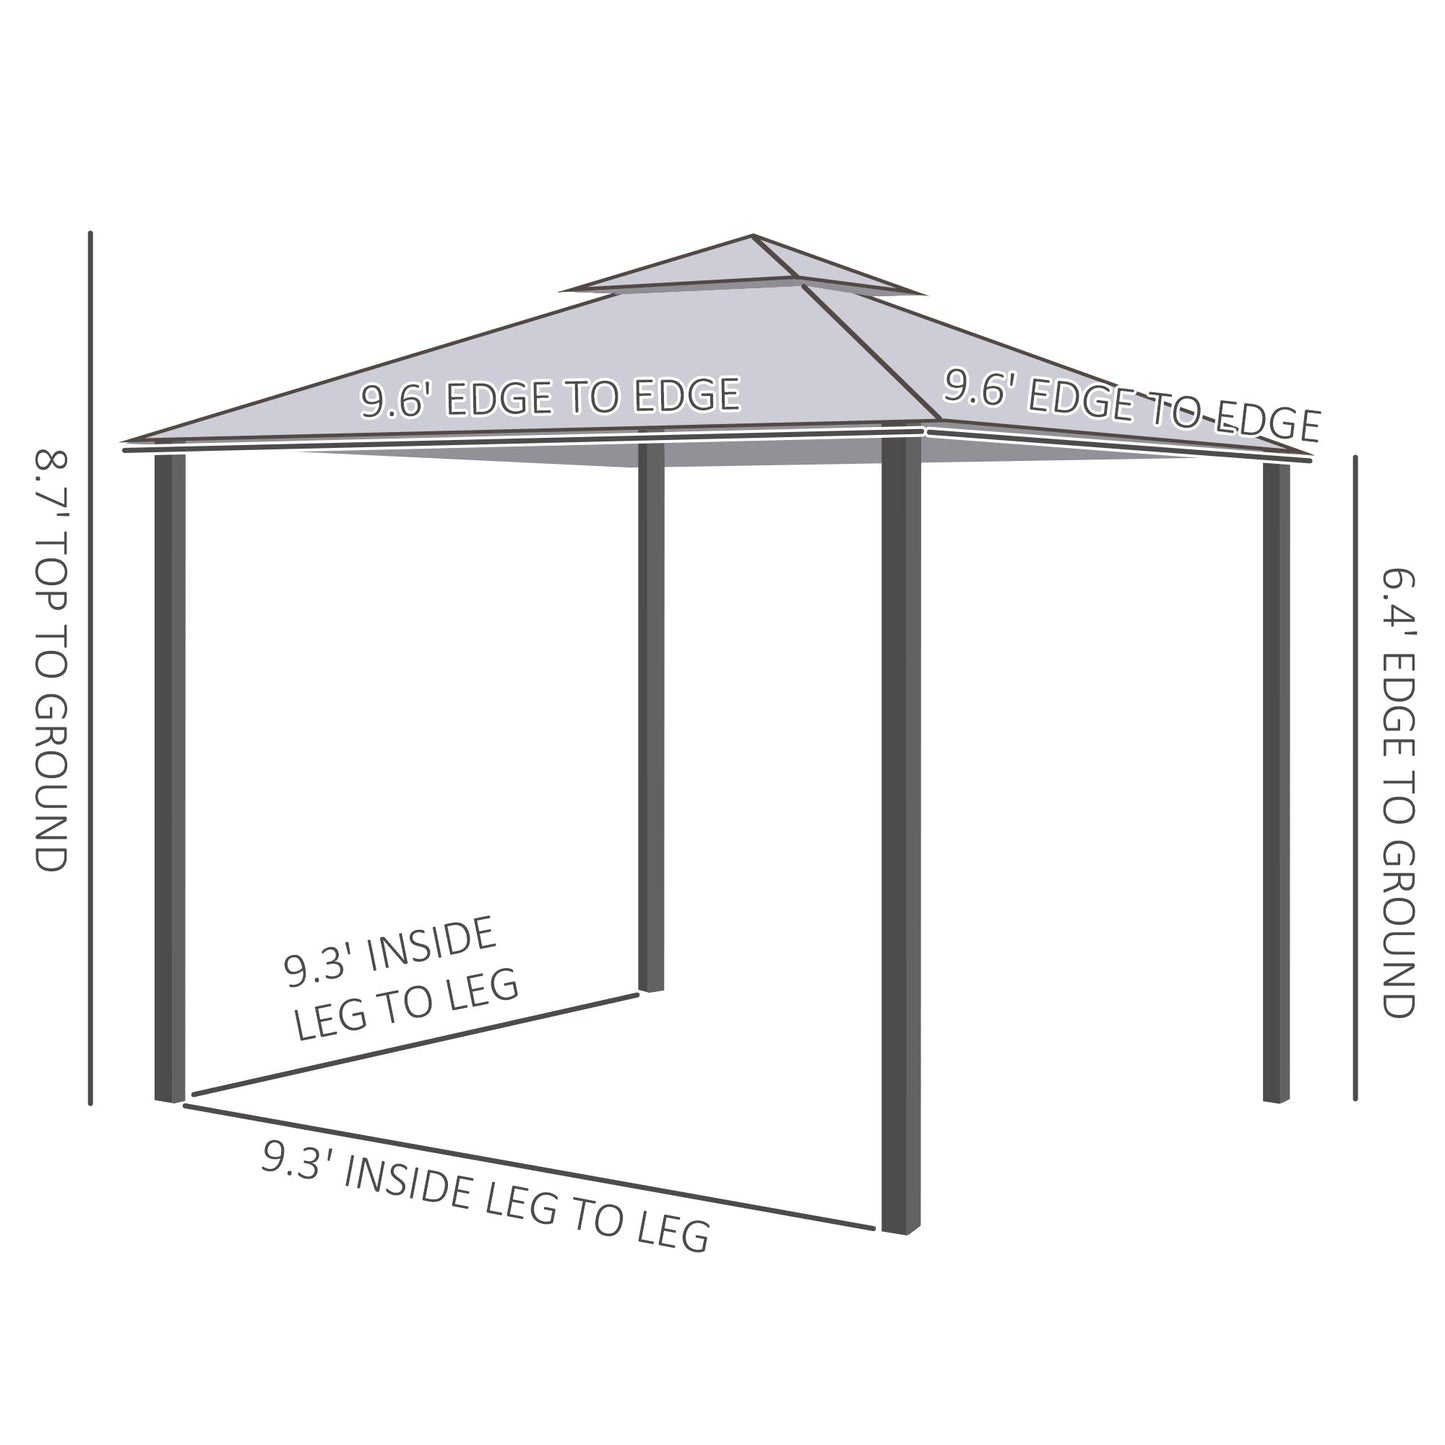 Outdoor and Garden-10' x 10' Gazebo Outdoor Canopy with Soft Top and Netting Walls, Steel Frame for Garden, Lawn, Backyard and Deck, Grey - Outdoor Style Company